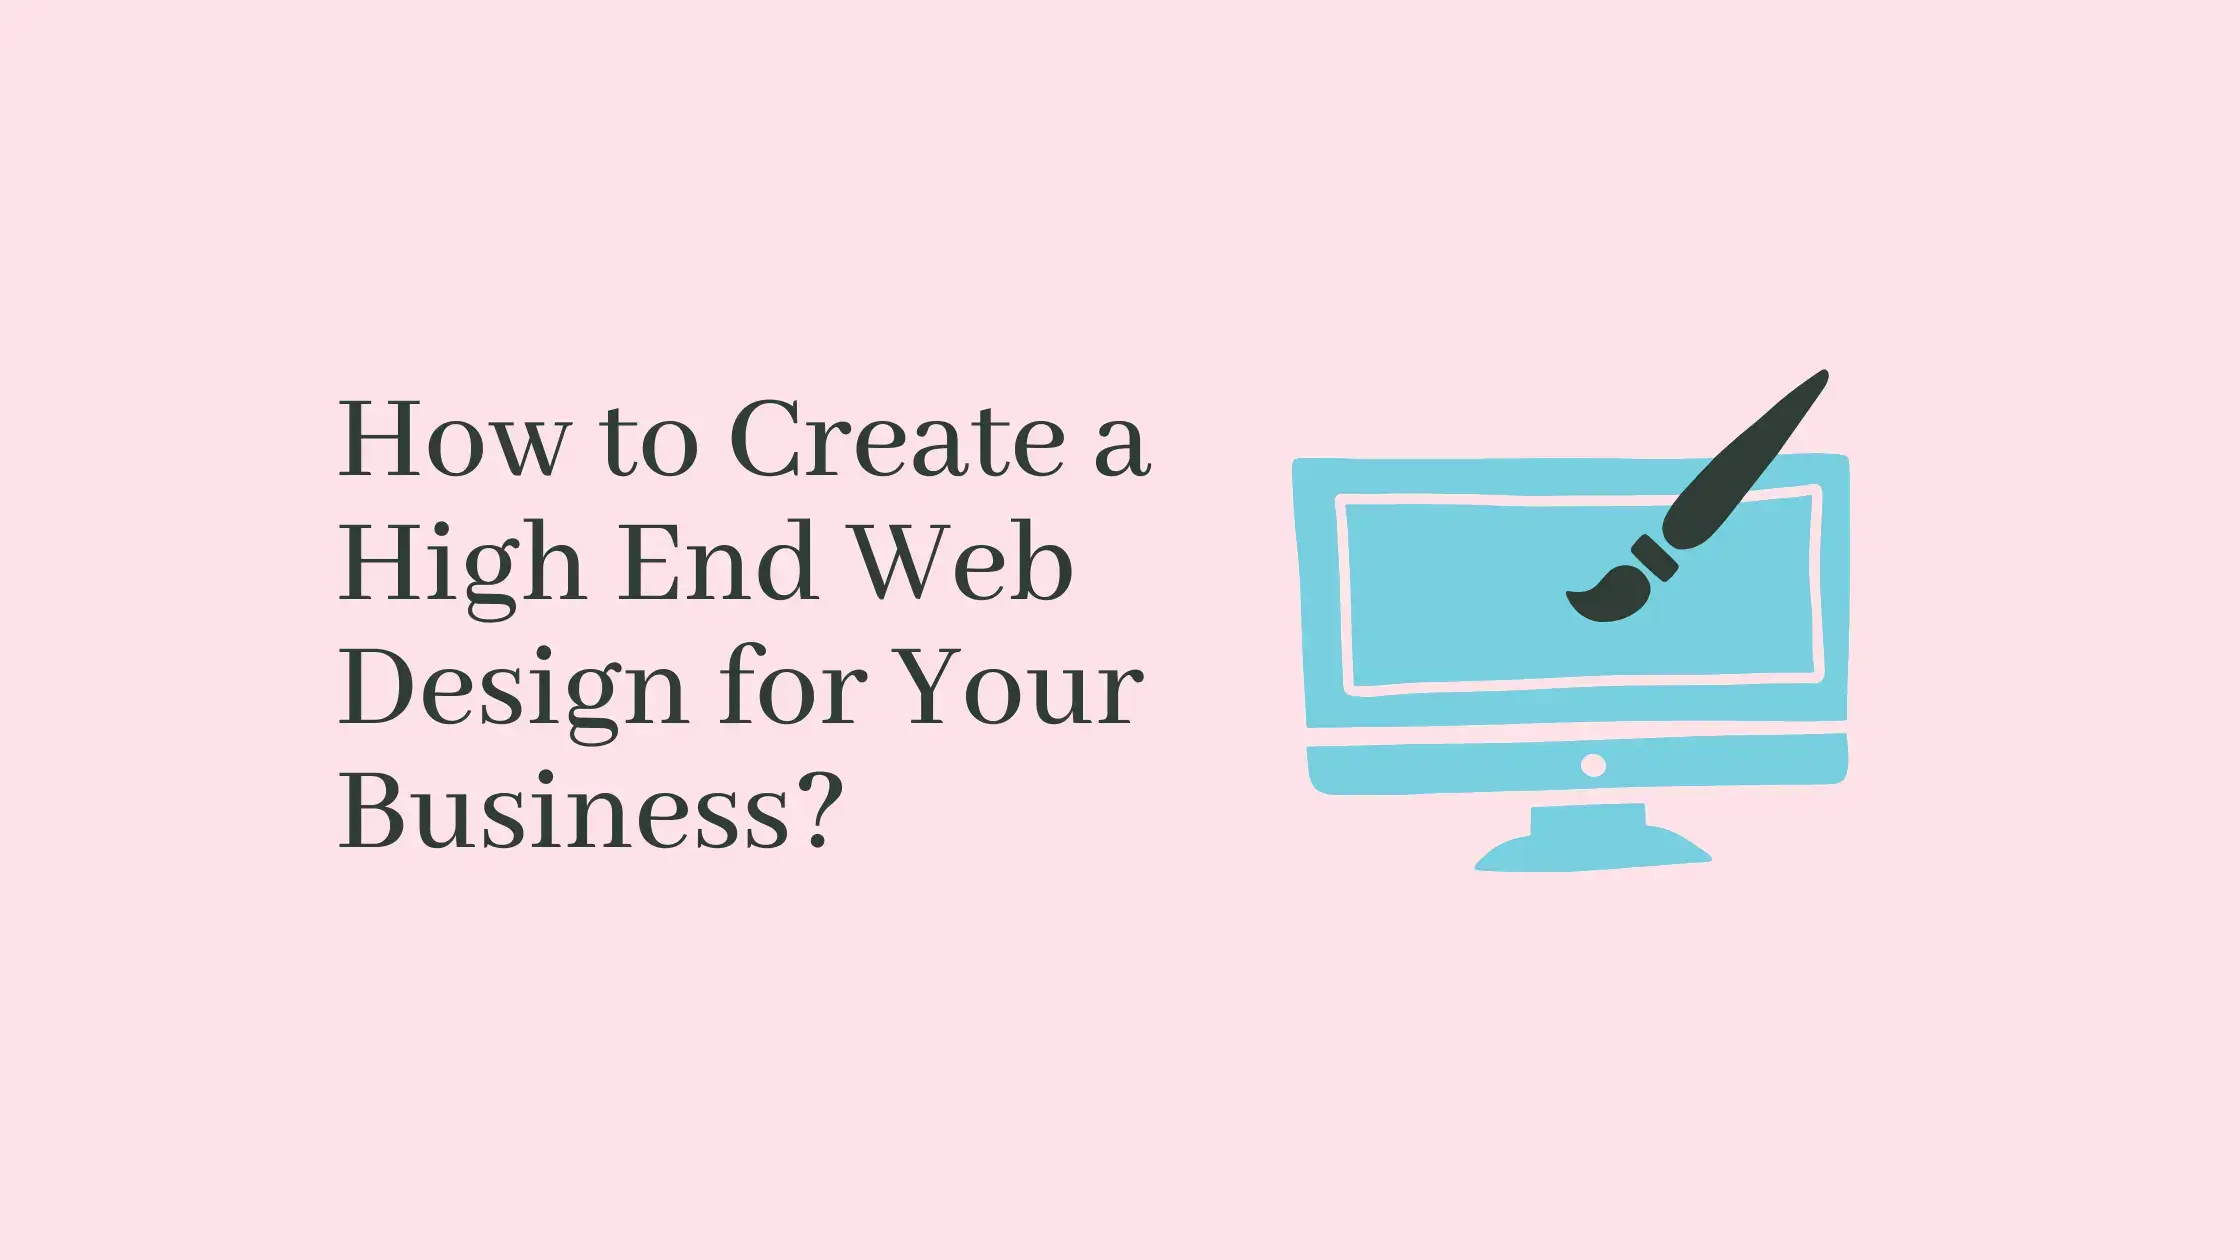 How-to-Create-a-High-End-Web-Design-for-Your-Business